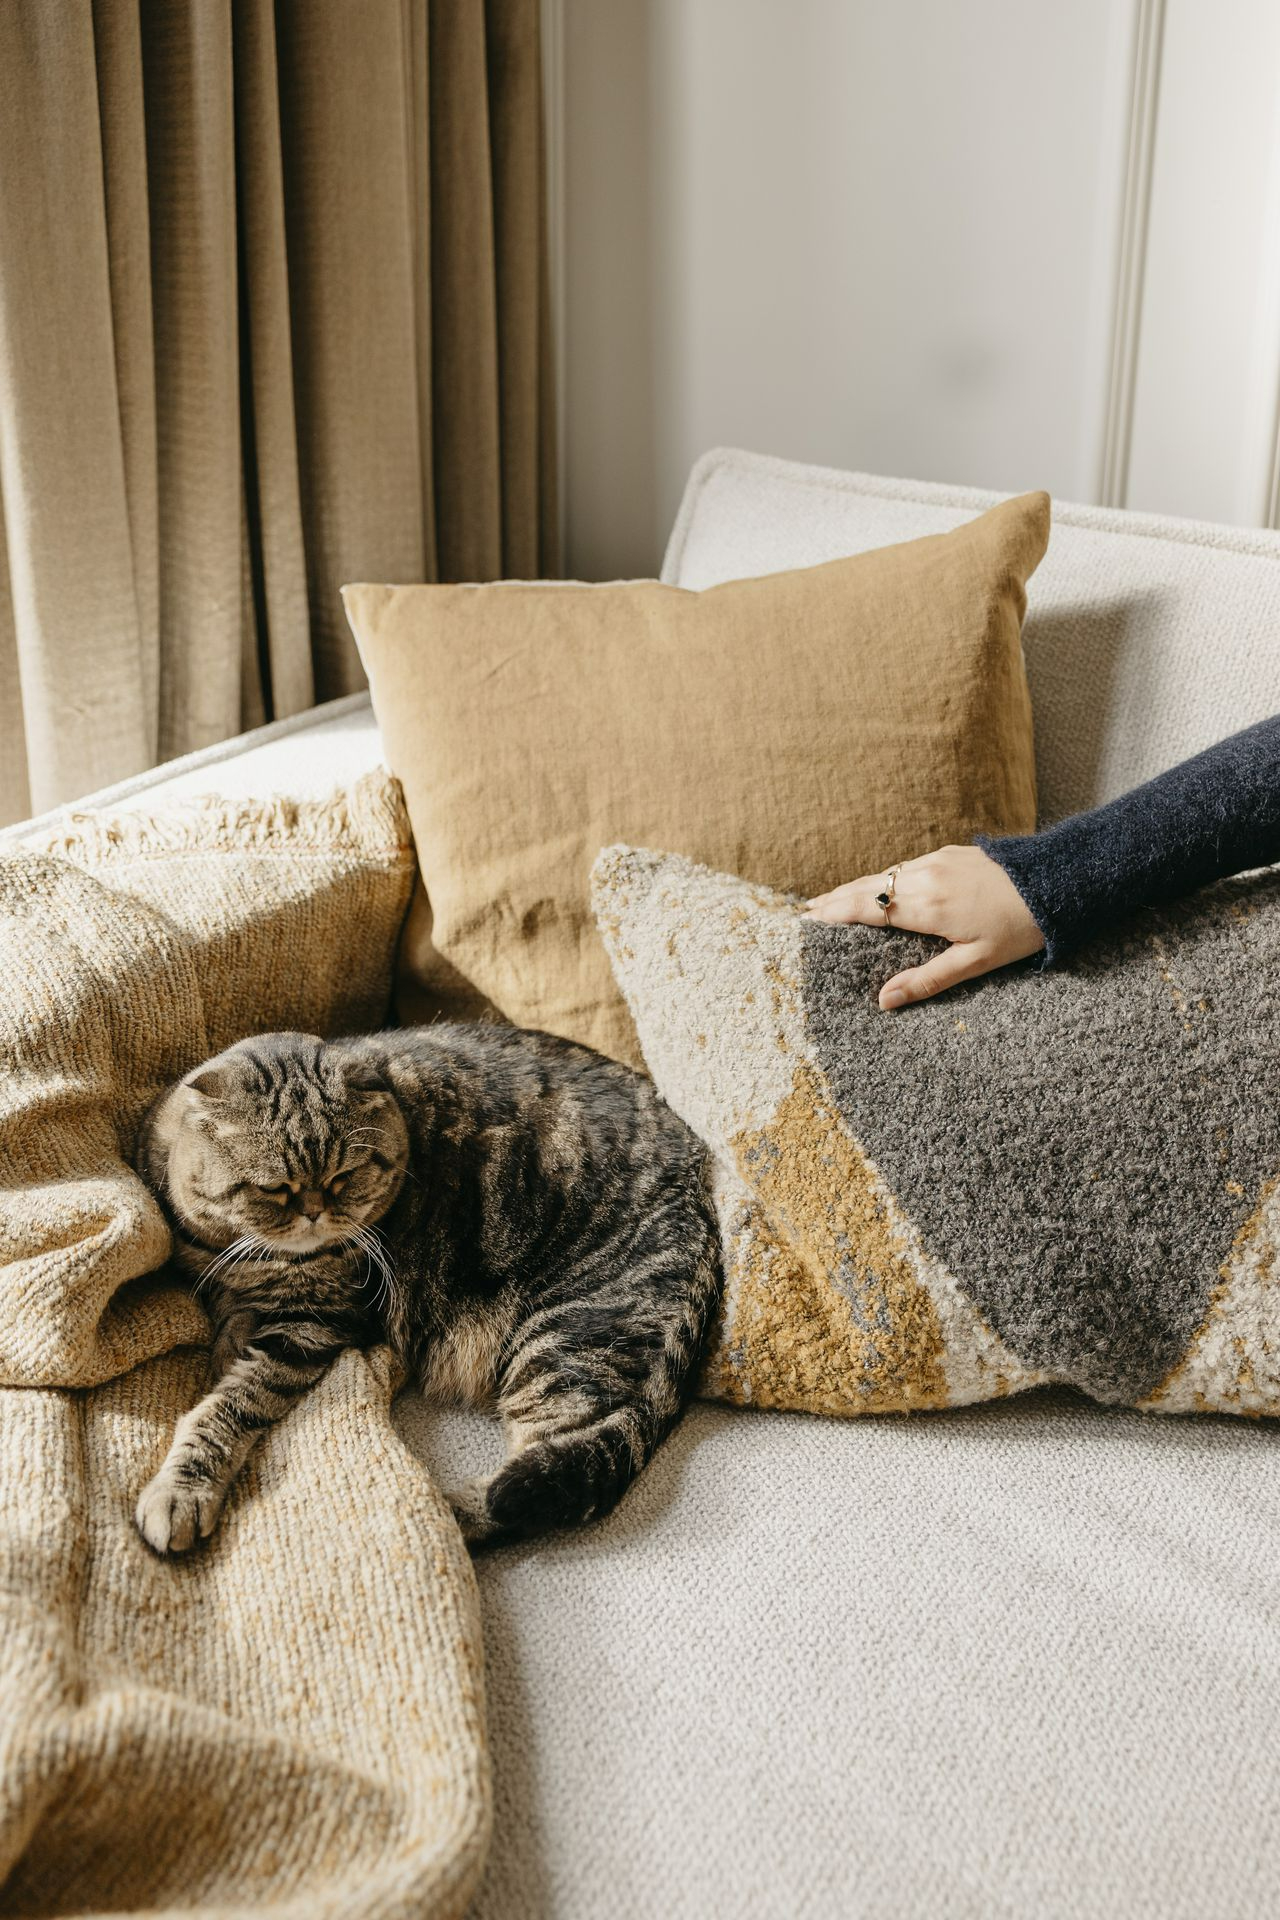 Rent warm accessories like pillows and throws at Live Light